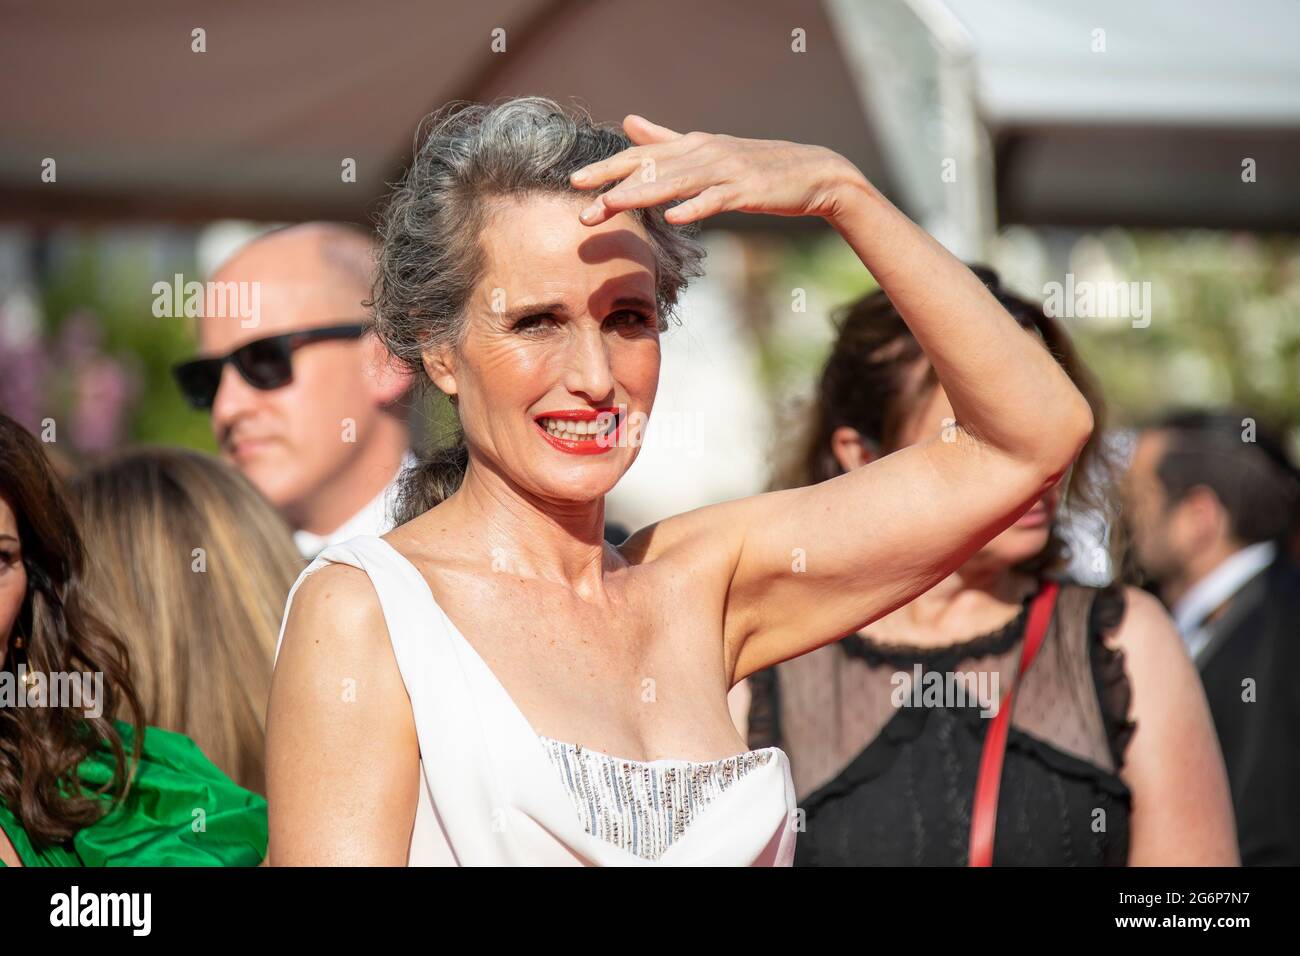 Cannes, FRA. 07th July, 2021. Andie McDowell attends the 'Tout S'est Bien Passe (Everything Went Fine)' screening during the 74th annual Cannes Film Festival on July 07, 2021 in Cannes, France. Credit: Franck Bonham/Image Space/Media Punch/Alamy Live News Stock Photo